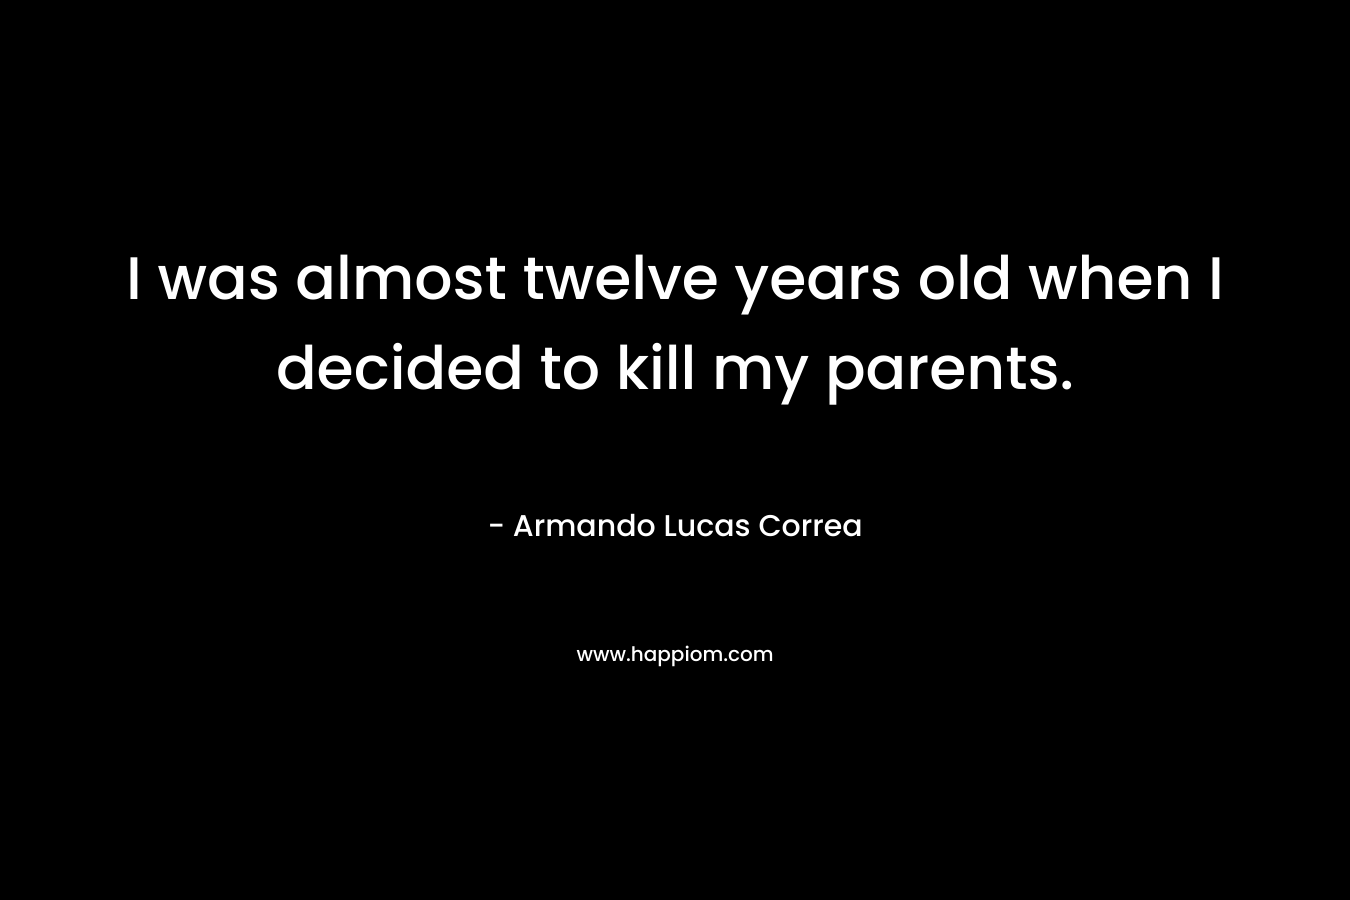 I was almost twelve years old when I decided to kill my parents. – Armando Lucas Correa